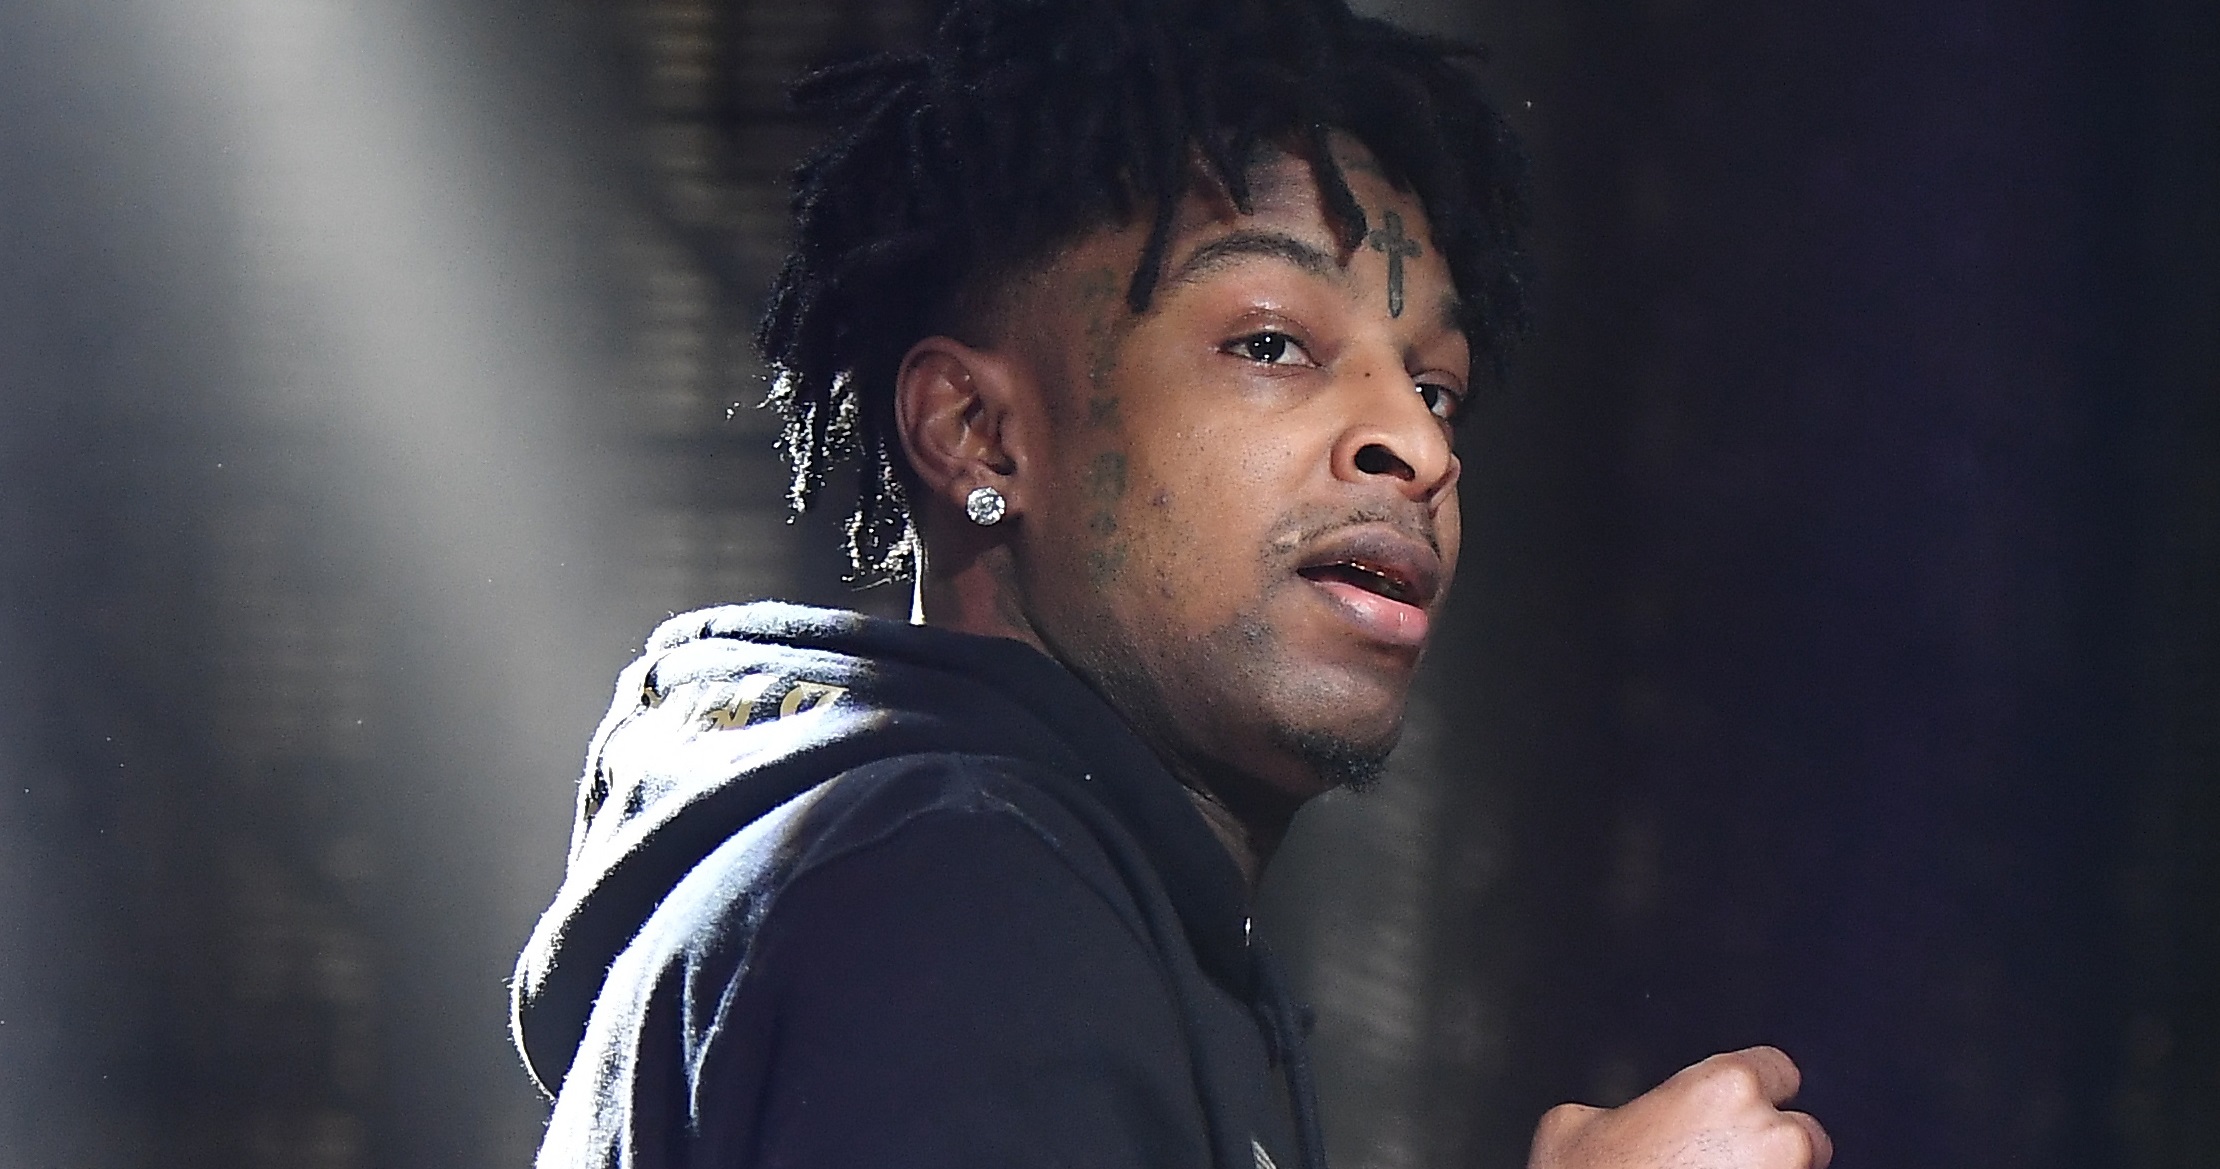 21 Savage & Metro Boomin Pay Tribute To King Von During 'Jimmy Fallon